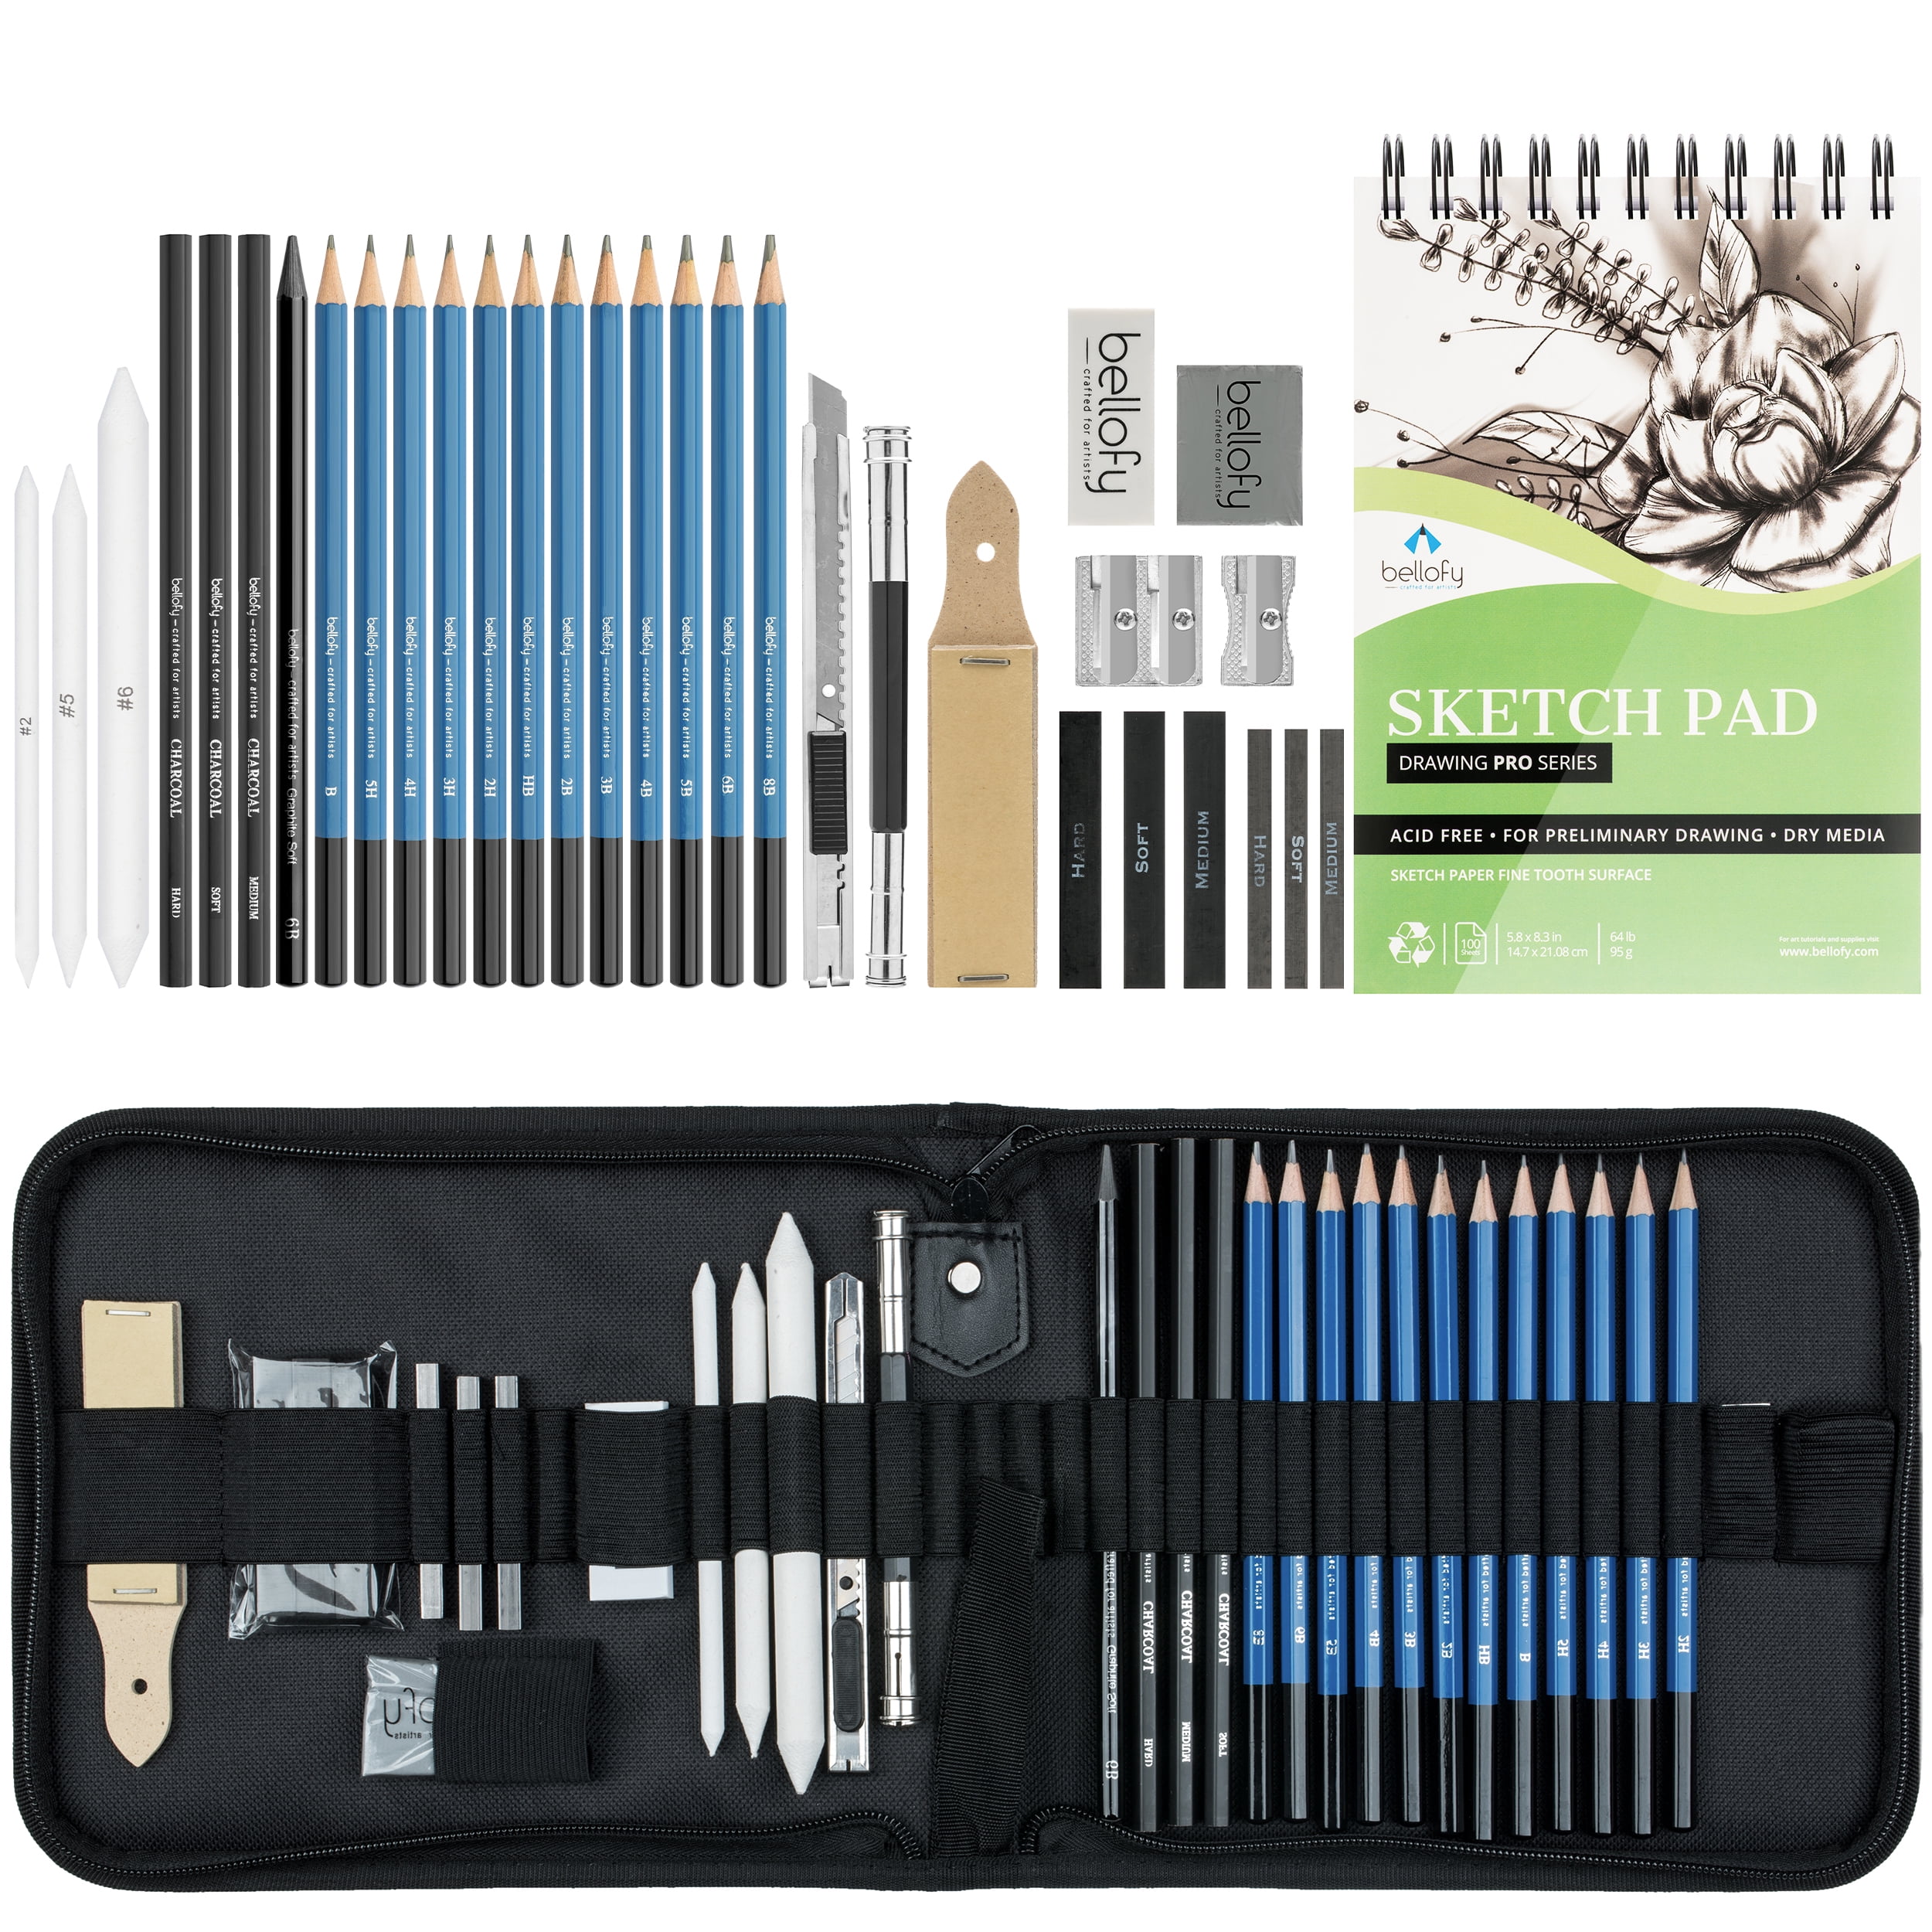 Artist Charcoal Pencils Drawing Set Beginners,1 Sharpener and 1 Blending Stump Include Shading 6 Pieces Soft Medium and Hard Charcoal Pencils for Sketching 